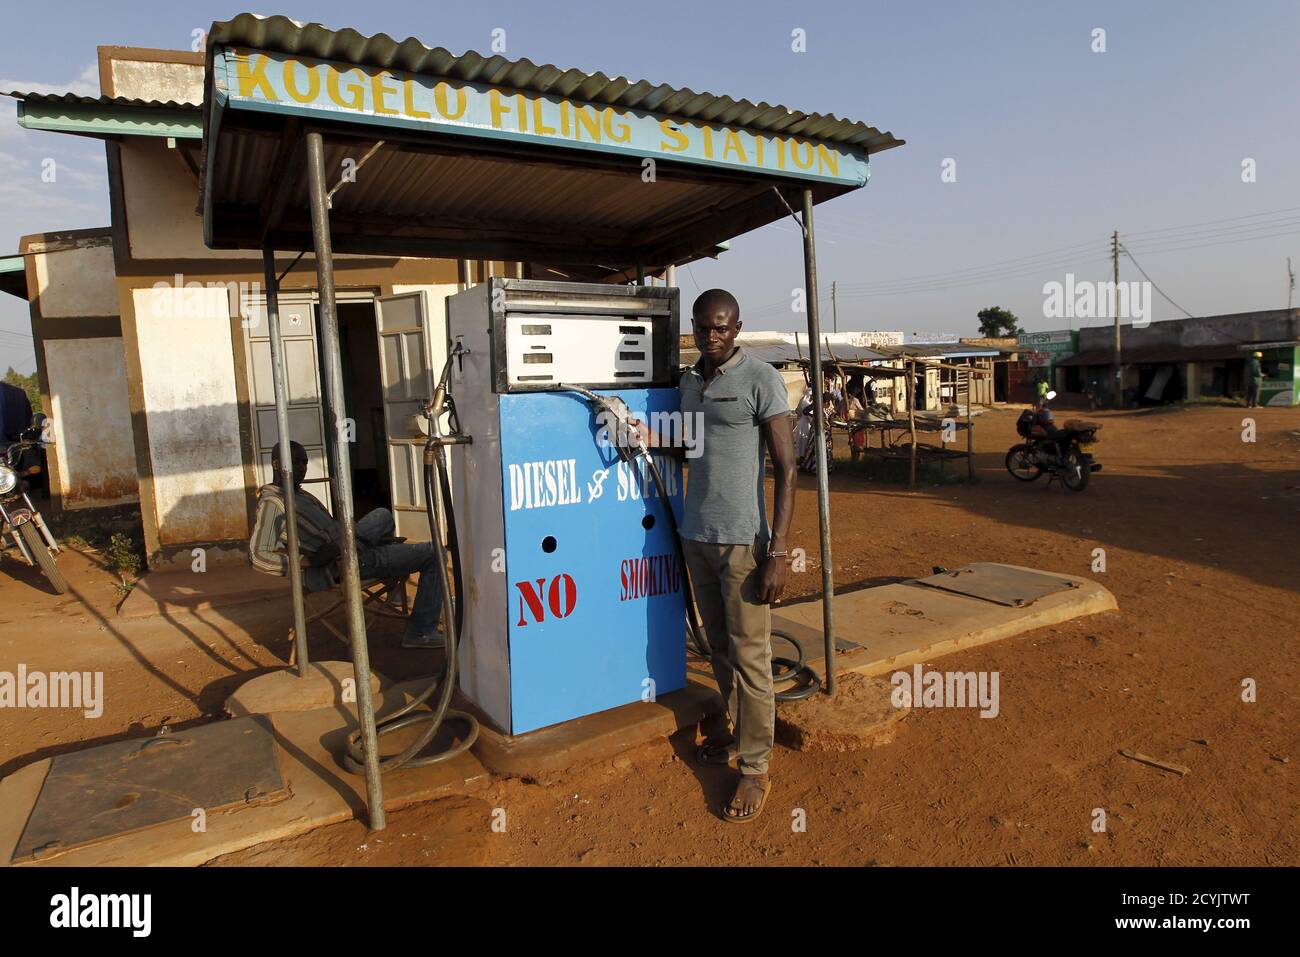 Kevin Oloo, a fuel pump attendant poses for a photograph next to his pump-machine at the trading centre in the U.S. President Barack Obama's ancestral village of Nyang'oma Kogelo, west of Kenya's capital Nairobi, July 15, 2015. Oloo, 25, said we expect investors to bring better facilities like modern fuel stations as well as food processing factories. 'With the U.S. Presidency, Nyang'oma Kogelo has seen better road infrastructure and improved security' he said. President Obama visits Kenya and Ethiopia in July, his third major trip to Sub-Saharan Africa after travelling to Ghana in 2009 and to Stock Photo